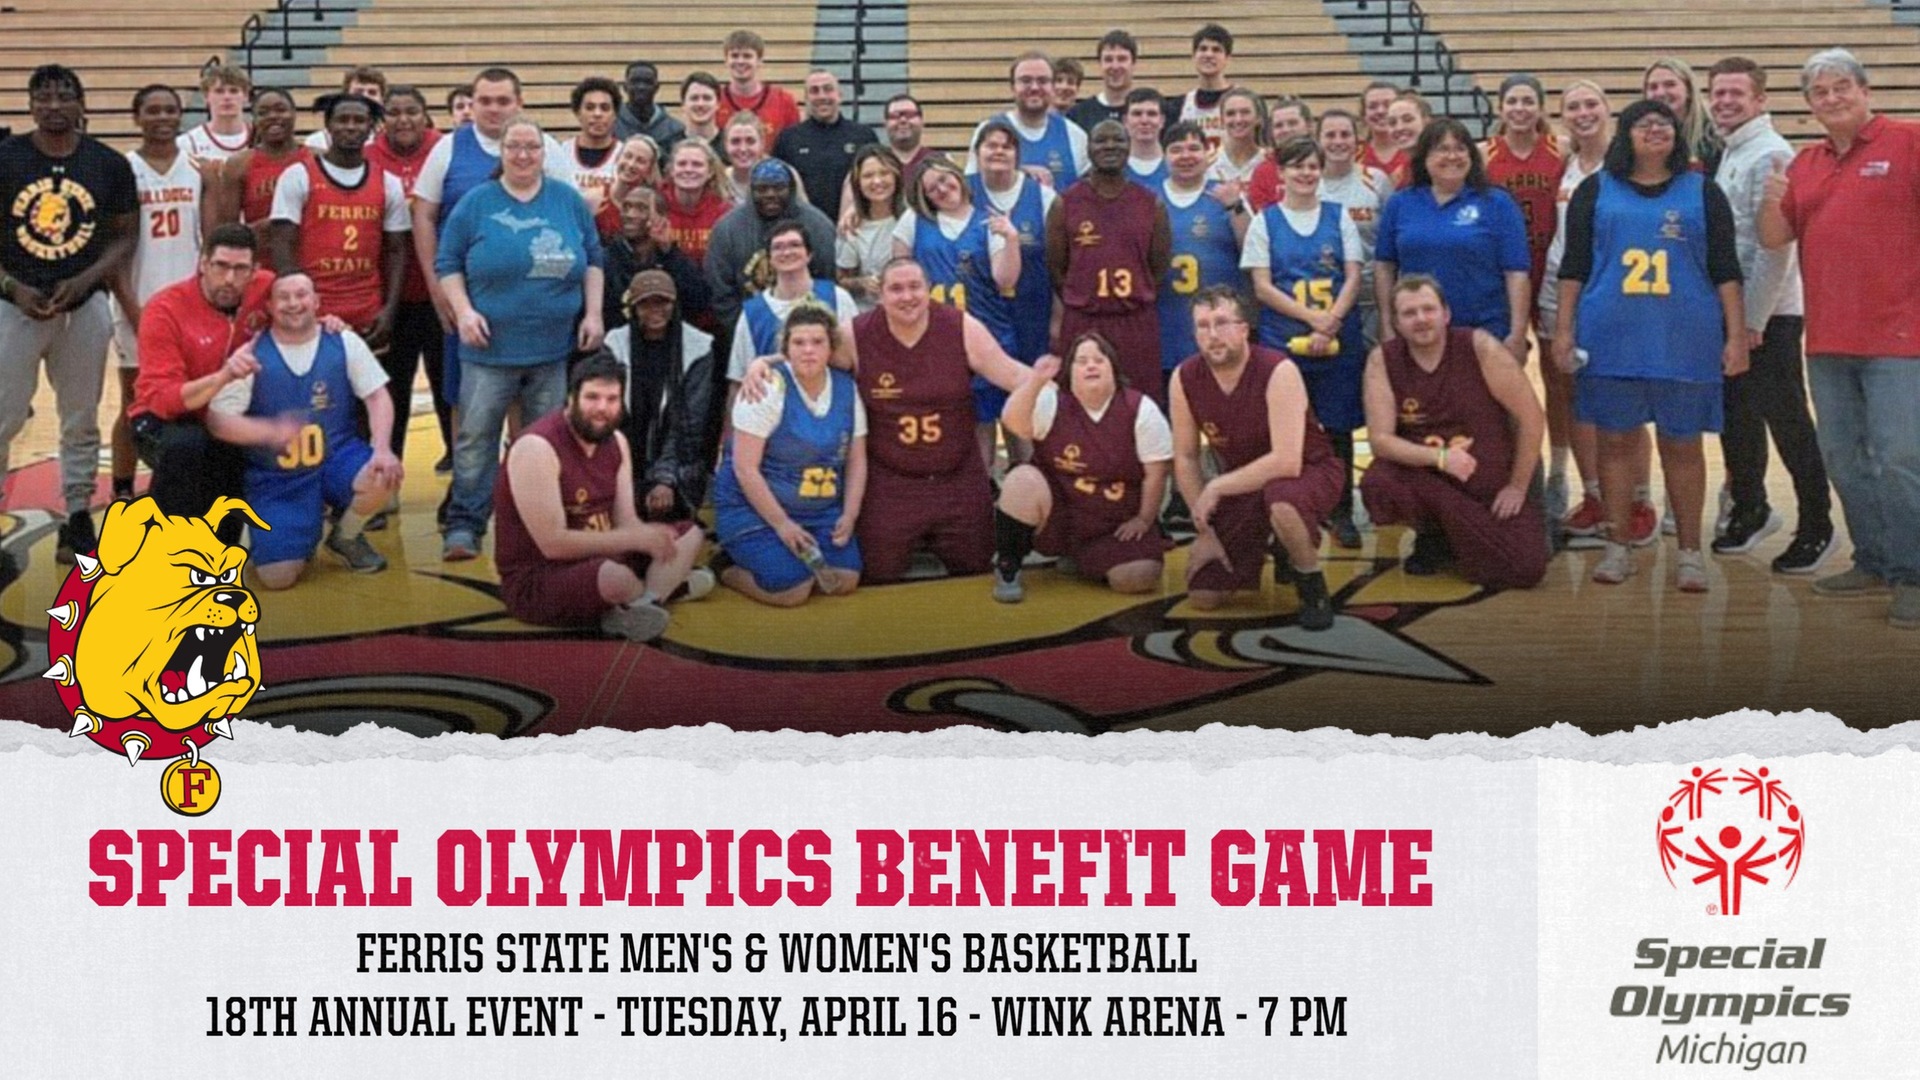 Ferris State Basketball Teams Partner with Special Olympics